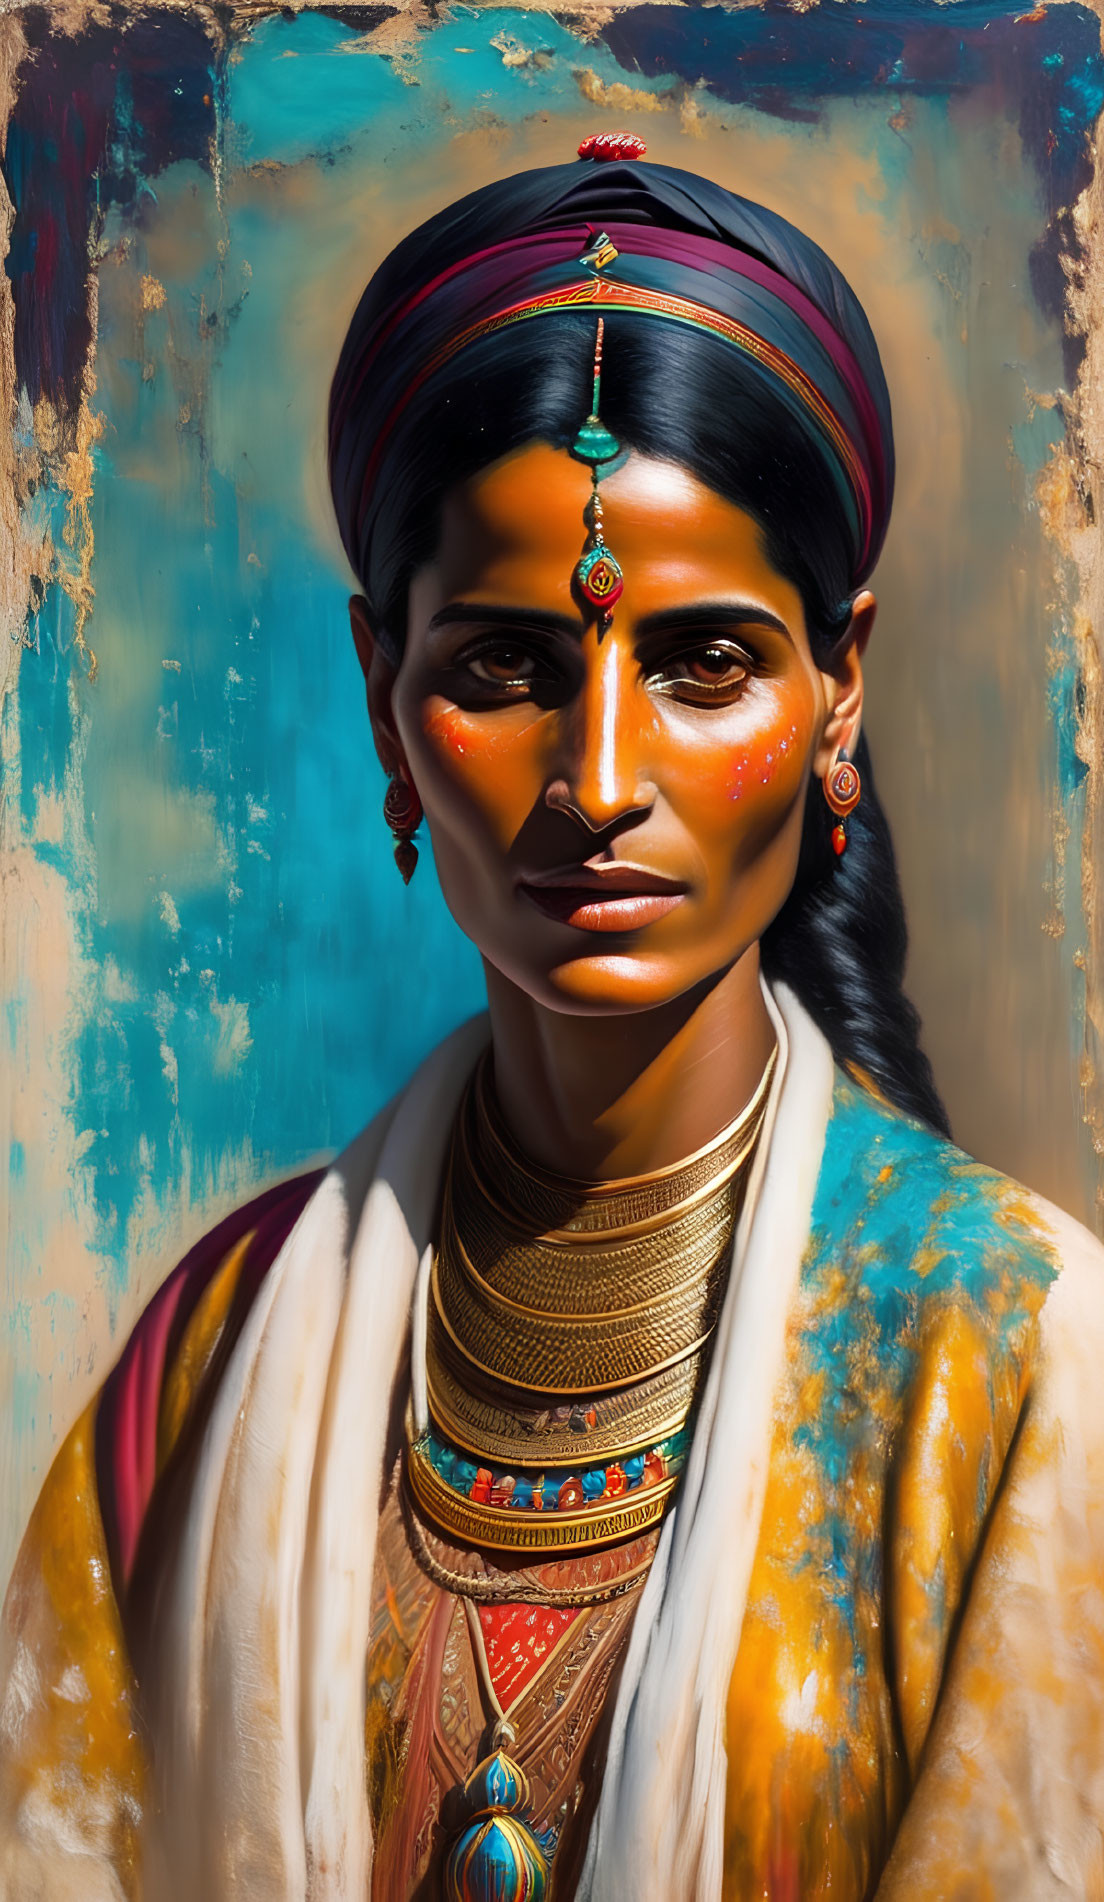 Portrait of woman with traditional jewelry, headscarf, and face markings on textured backdrop